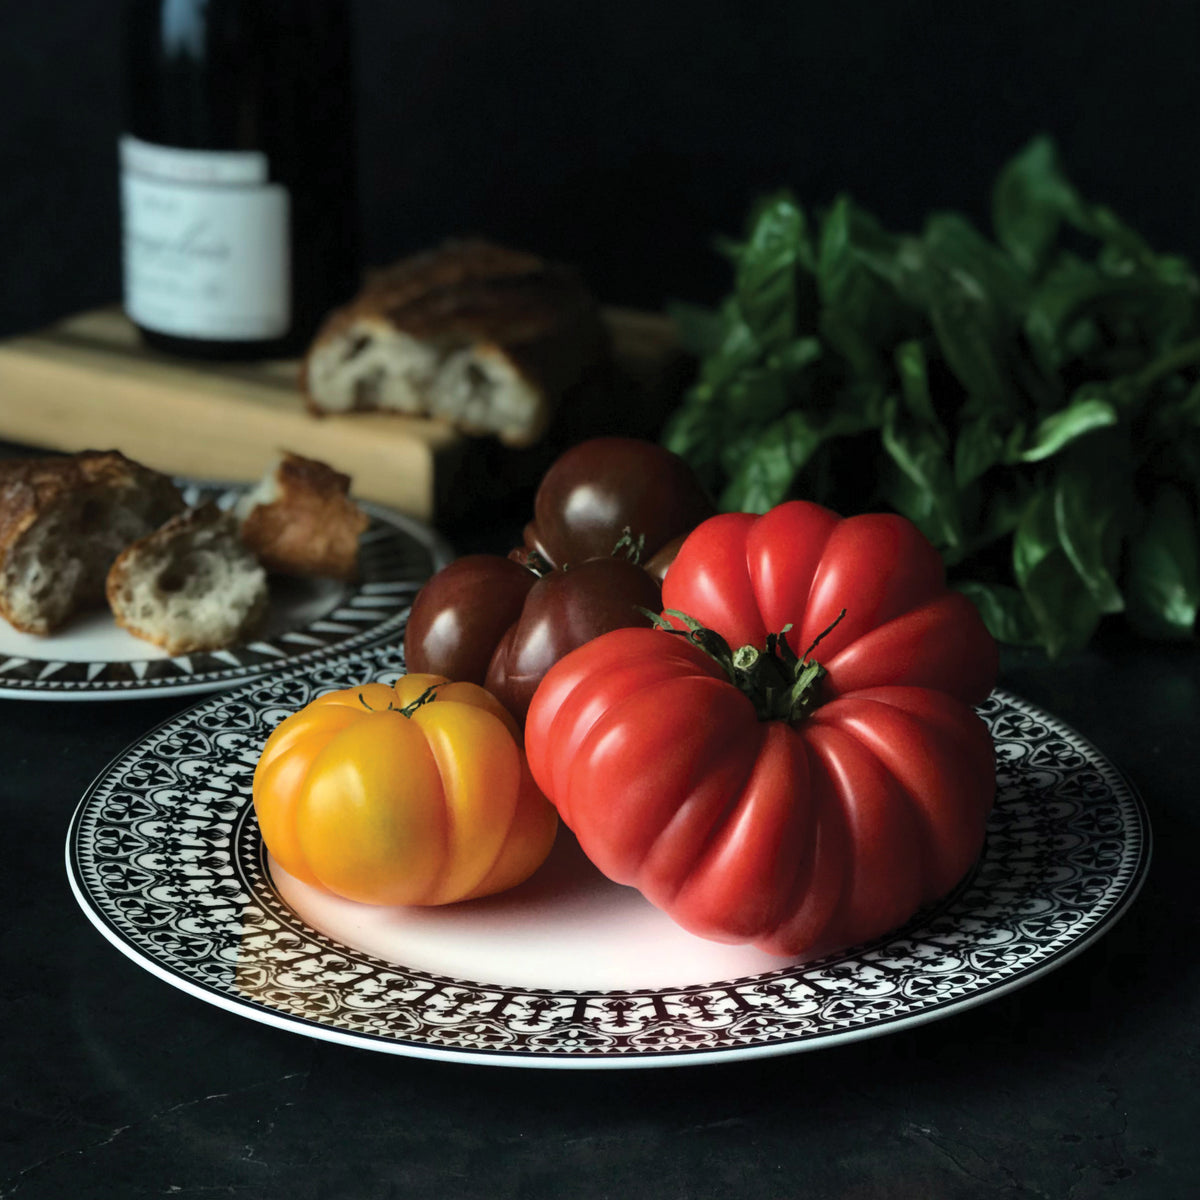 A variety of tomatoes, including a large red one, a yellow one, and brown ones, are arranged on a decorative Casablanca Rimmed Dinner Plate by Caskata Artisanal Home. In the background, there&#39;s a loaf of bread, some basil, and a bottle of wine. The hand decorated details on the high-fired porcelain add an exquisite touch to the scene.